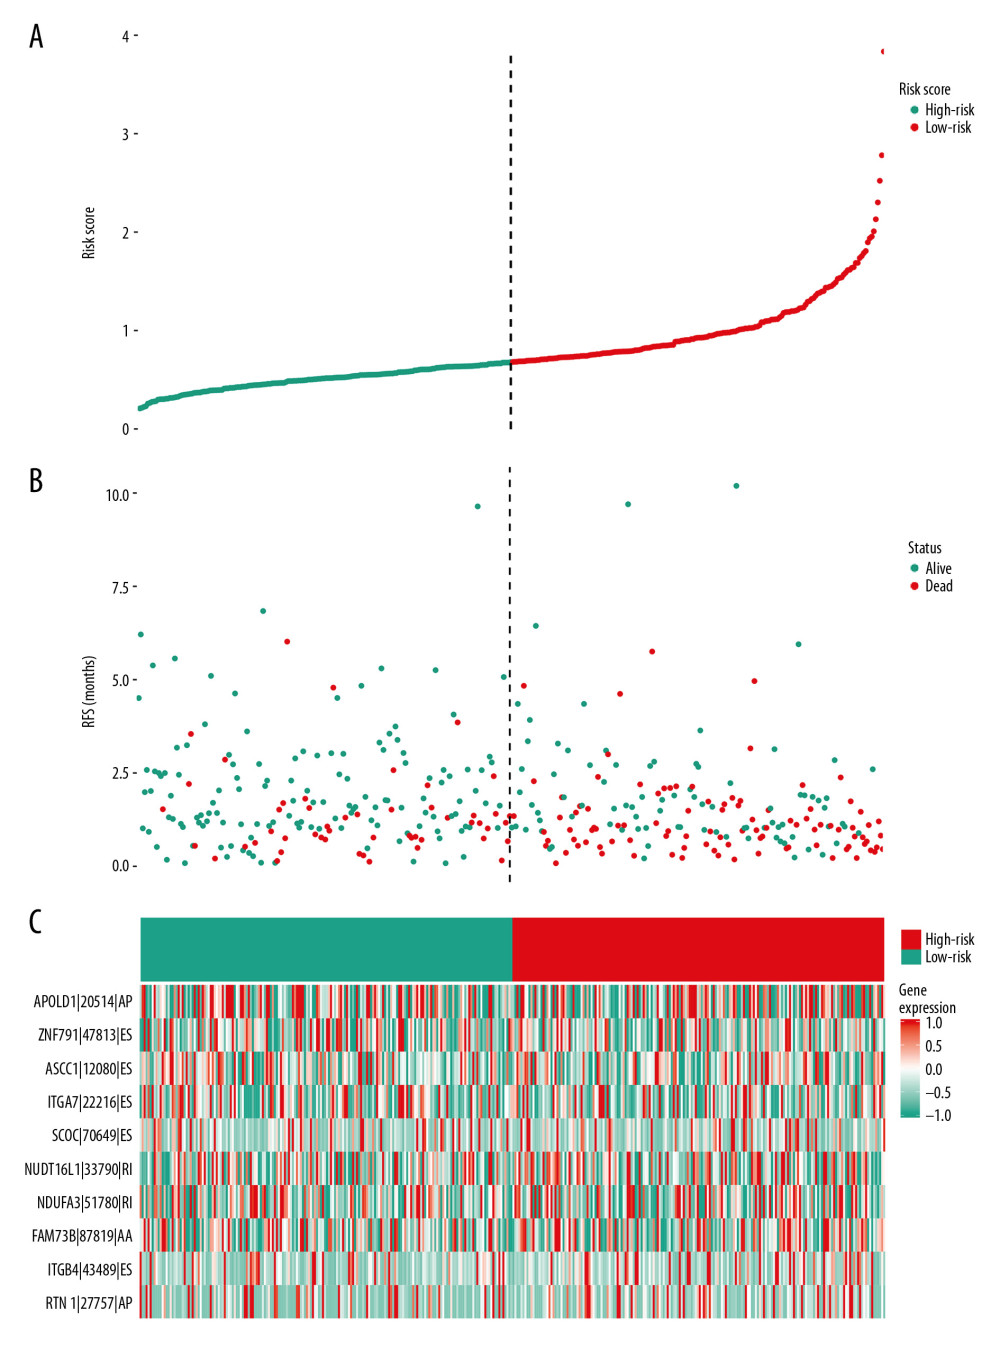 mRNA signature risk score distribution, heatmap of the mRNA expression profiles. Rows represent mRNAs, and columns represent patients. (A) The risk score curve, red dots show high-risk samples and while green dots show low-risk samples. (B) Distribution of patients’ survival status and overall survival (OS) times classified with risk scores, red dots indicate dead while green dots indicate alive. (C) Heatmap displays splicing pattern of the mRNA signatures. Color transition from green to red indicates the increasing PSI score of corresponding genes expression from low to high.